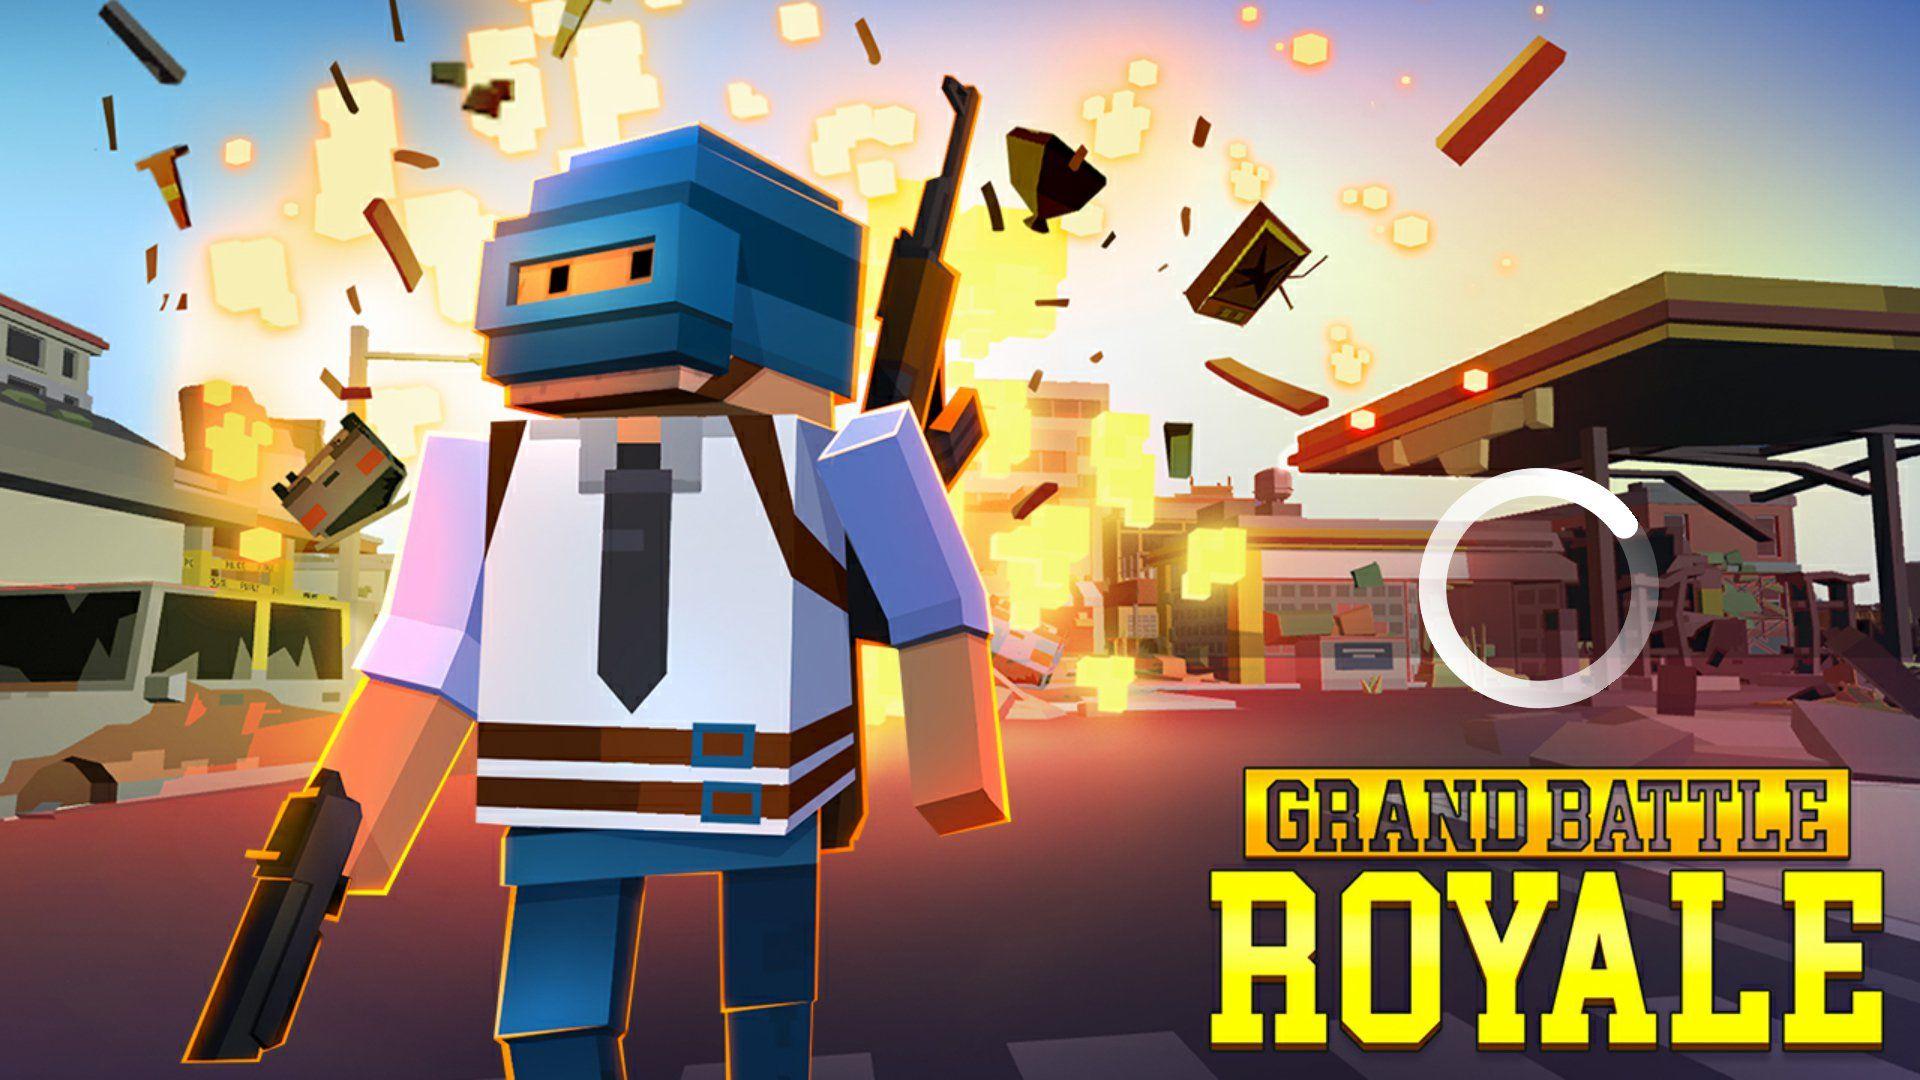 Grand Battle Royale 3.4.3 for Android APK Free